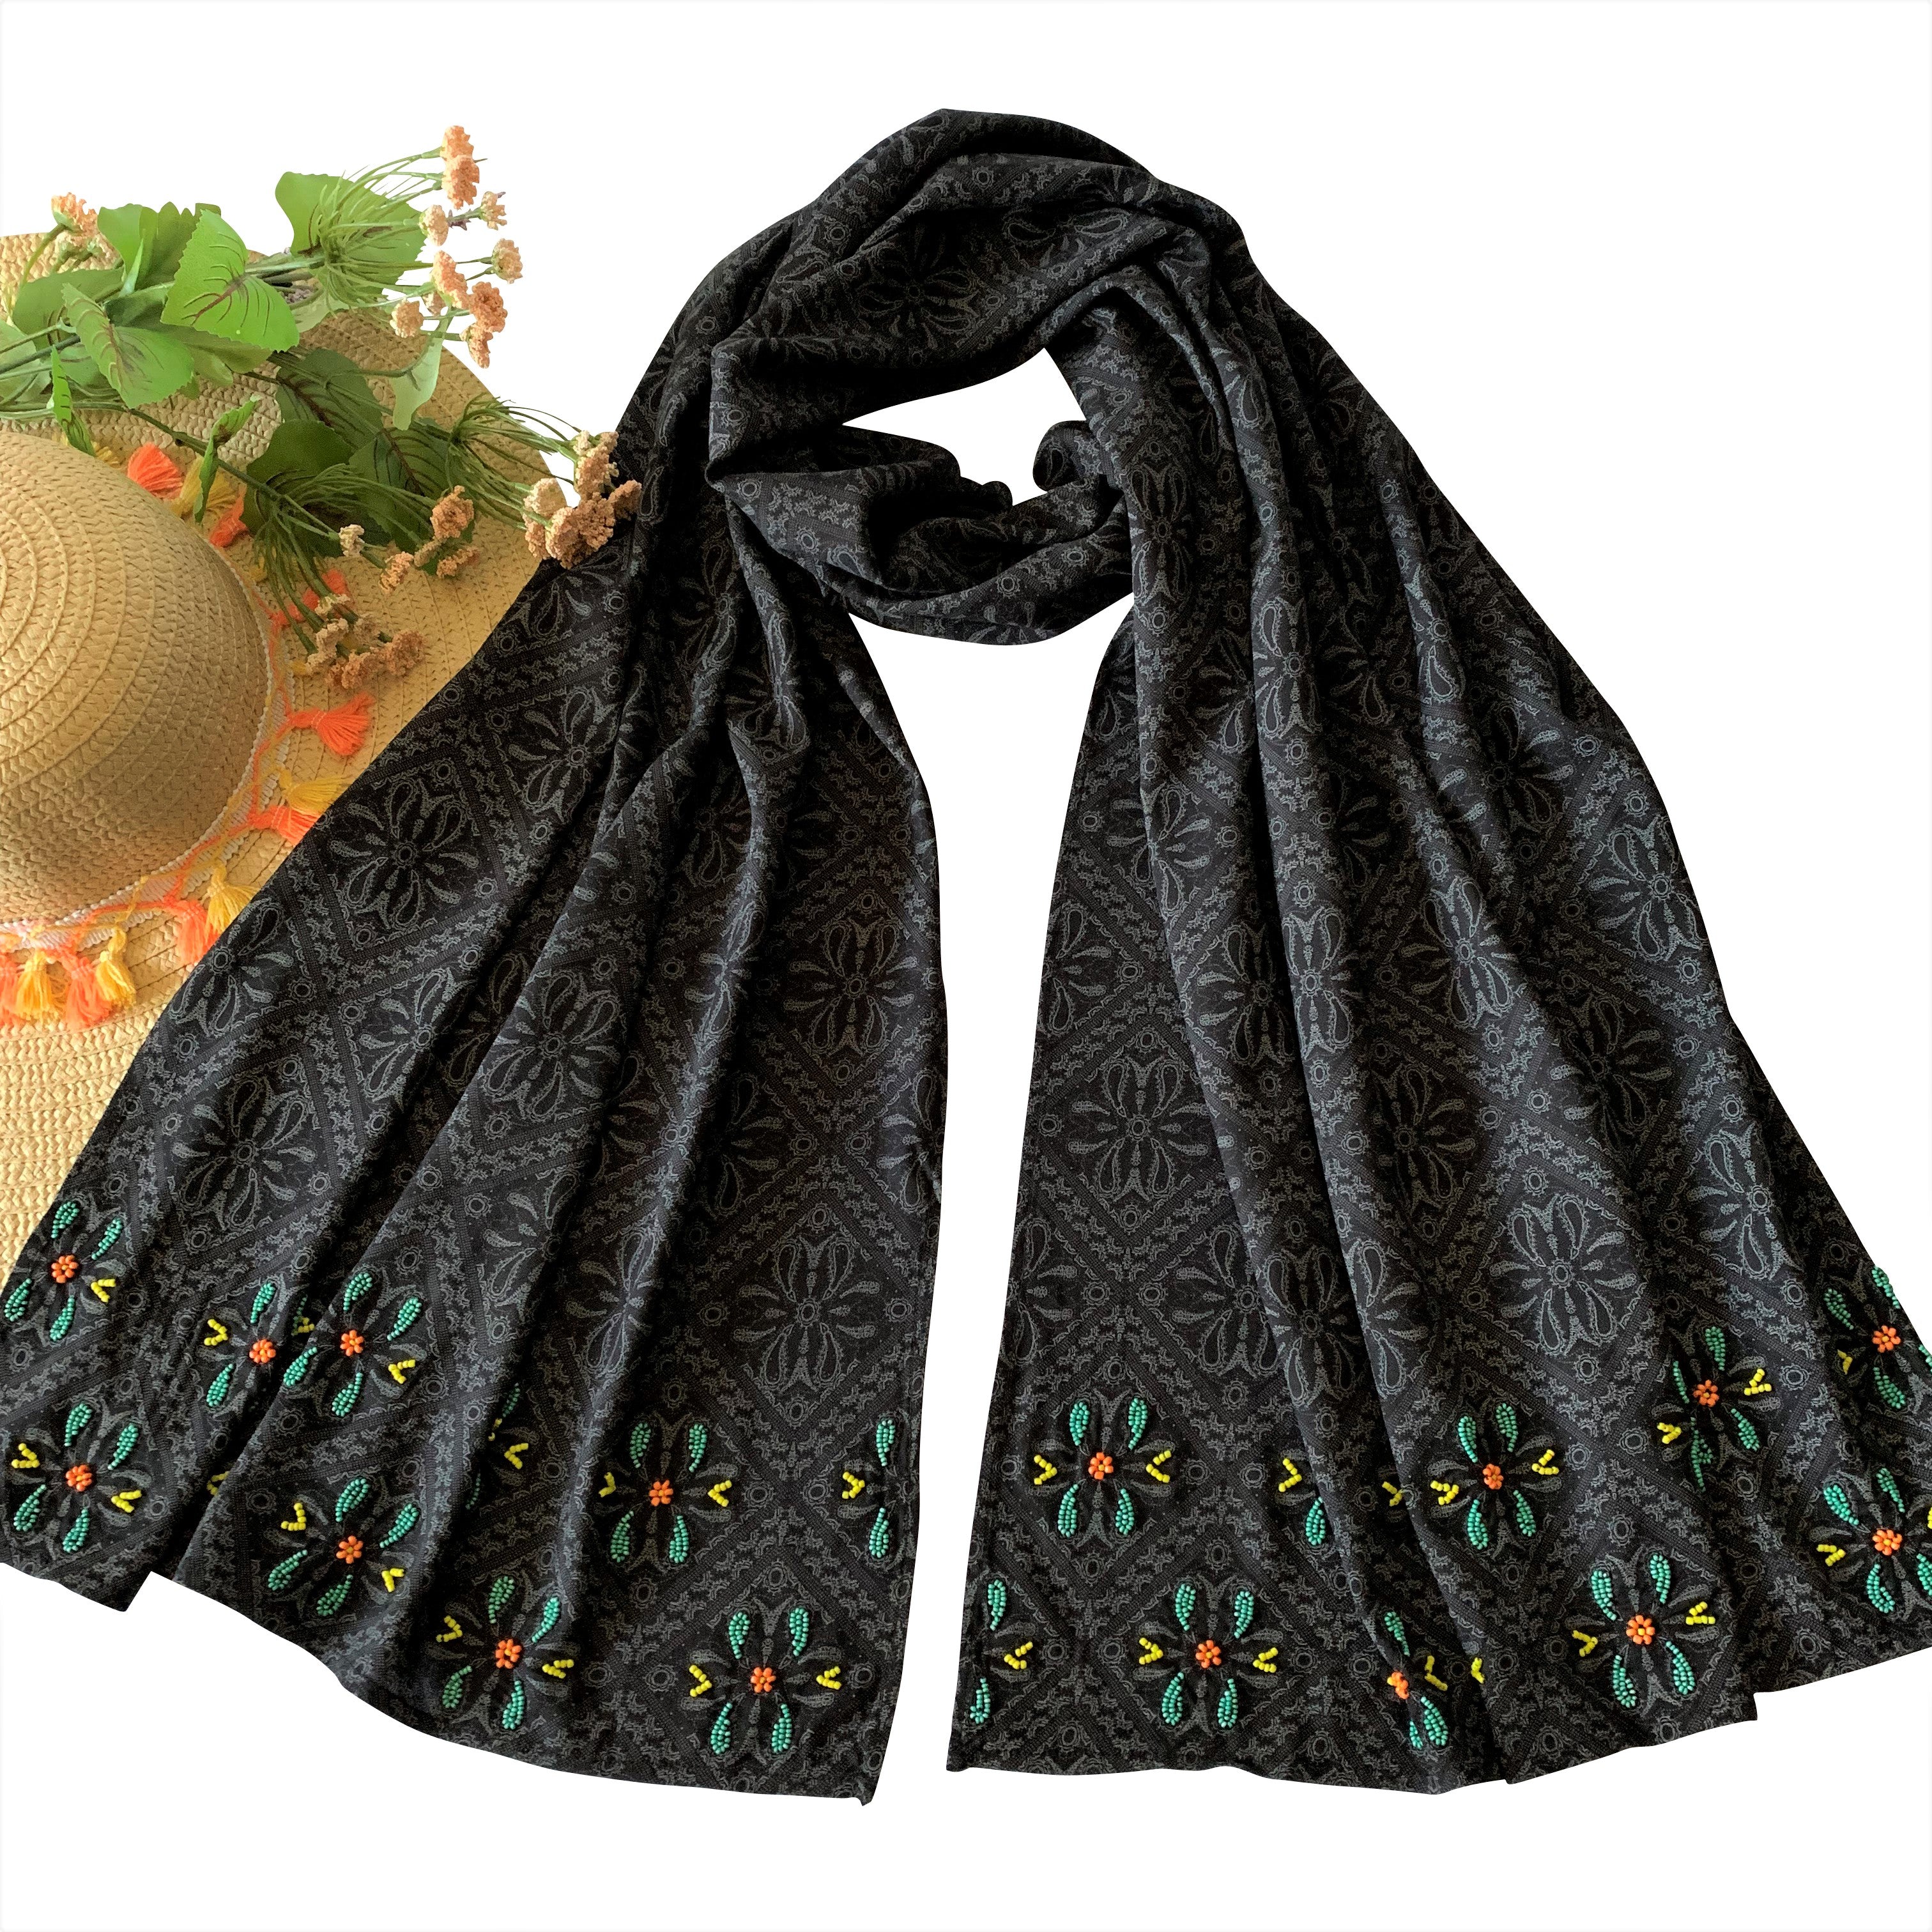 Beaded Embroidery on Printed Black Long Scarf